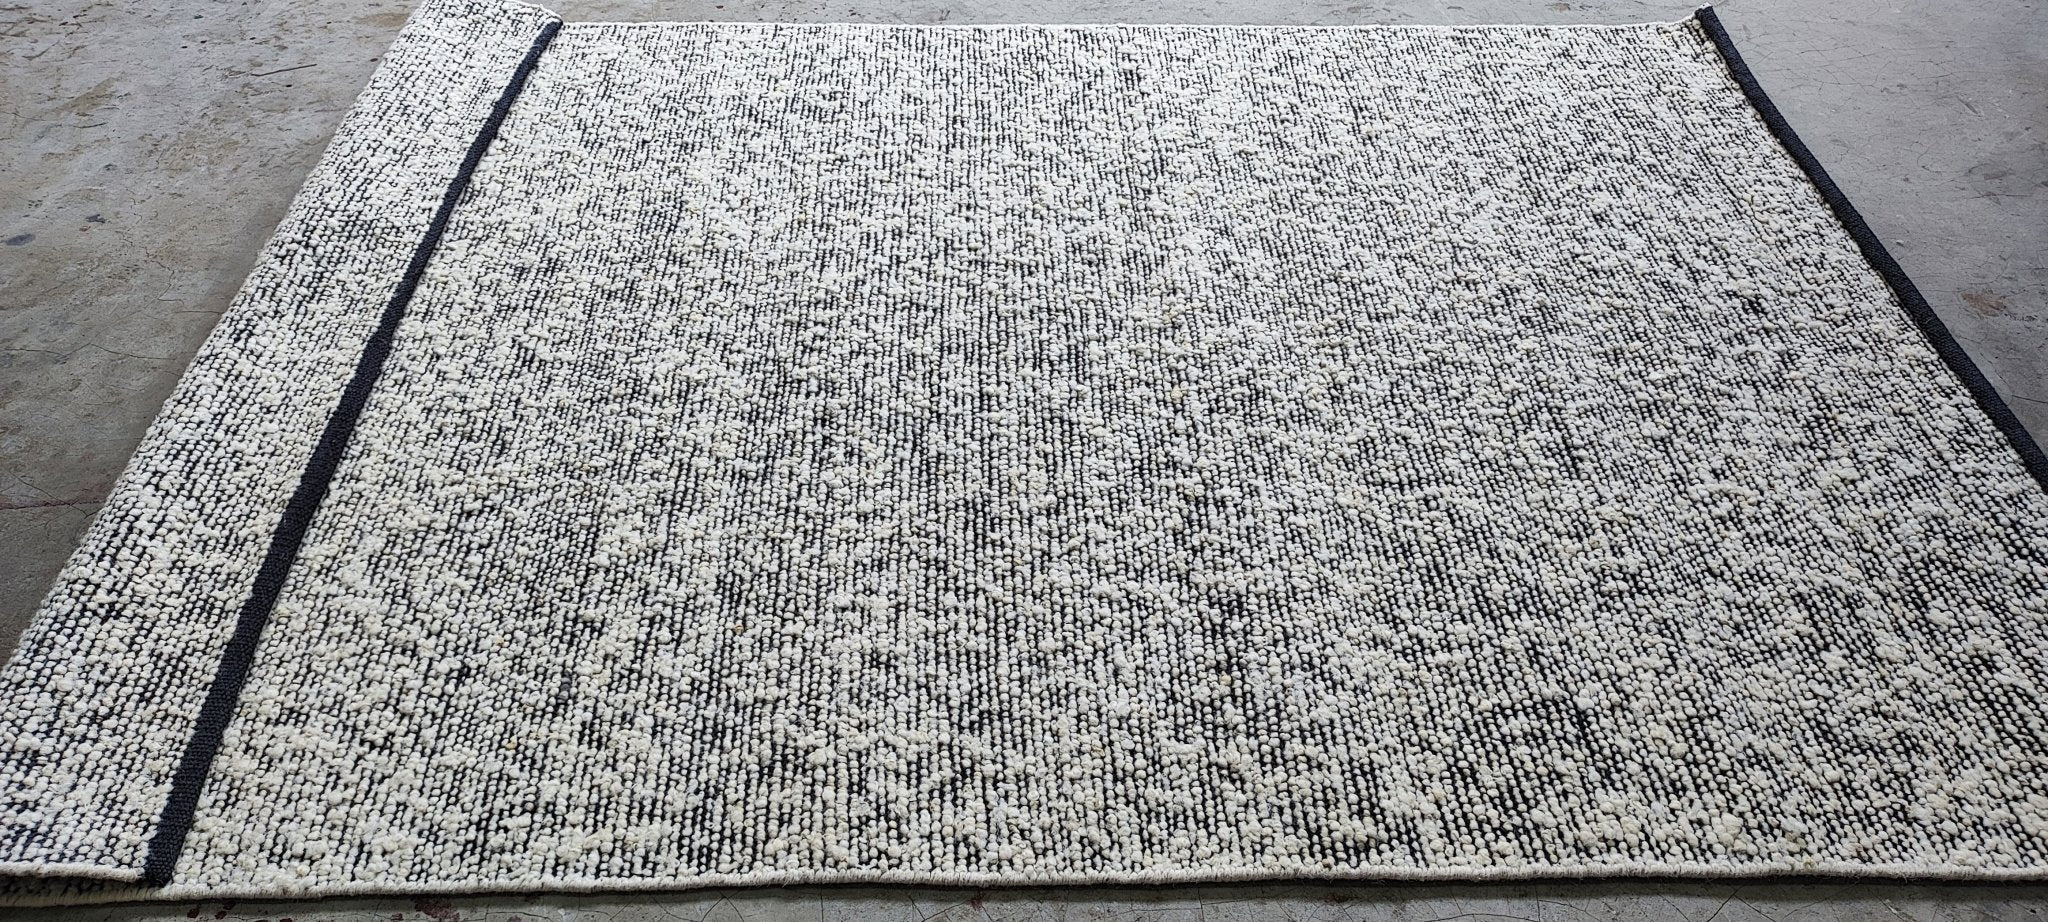 Rocco 5x7 Handwoven Natural Textured Durrie | Banana Manor Rug Factory Outlet